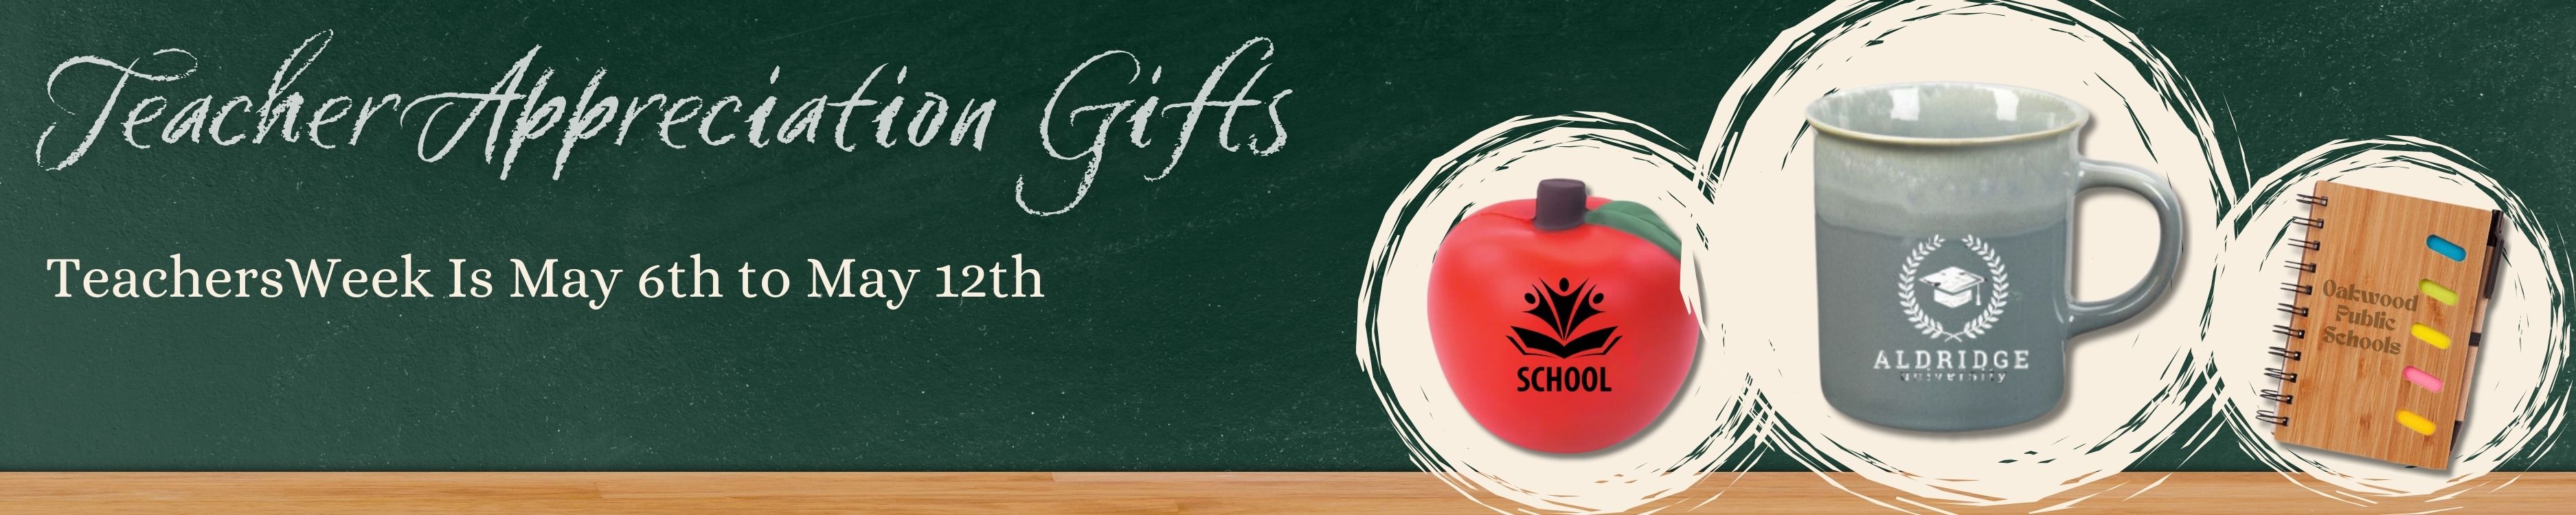 Free Shipping Codes for Custom Logo Gifts for Teachers